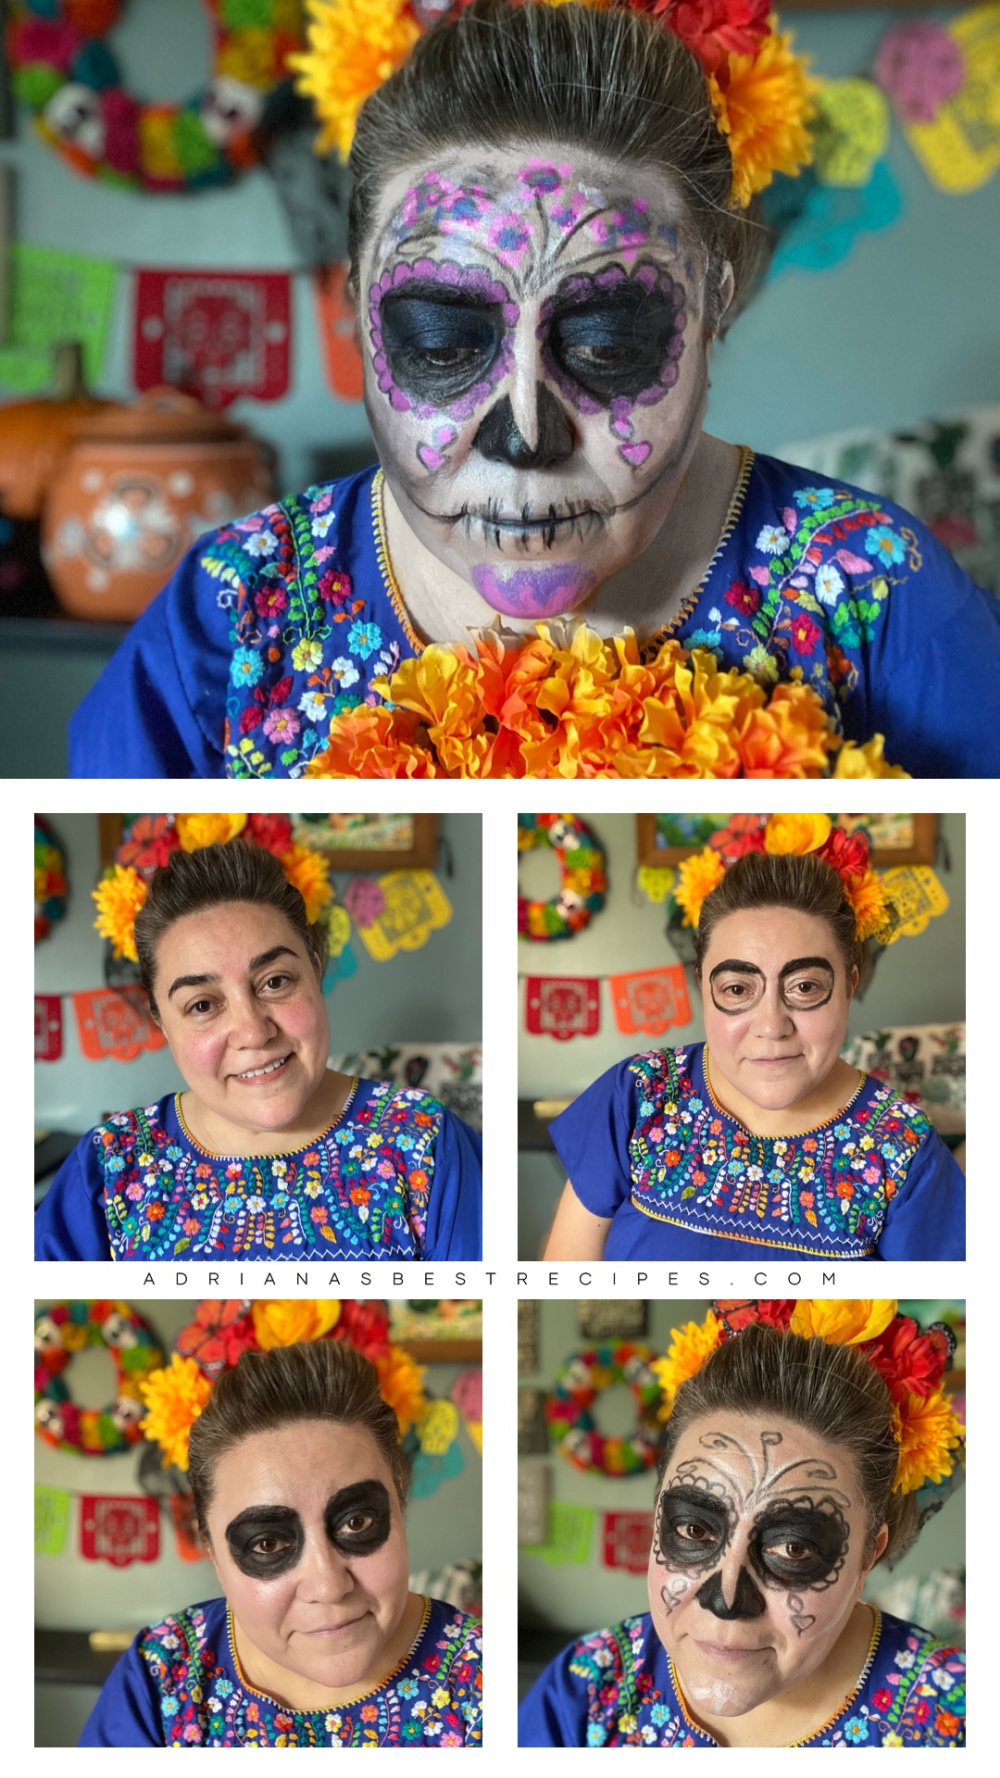 showing the step by step process on how to apply the makeup for doing a catrina or sugar skull face